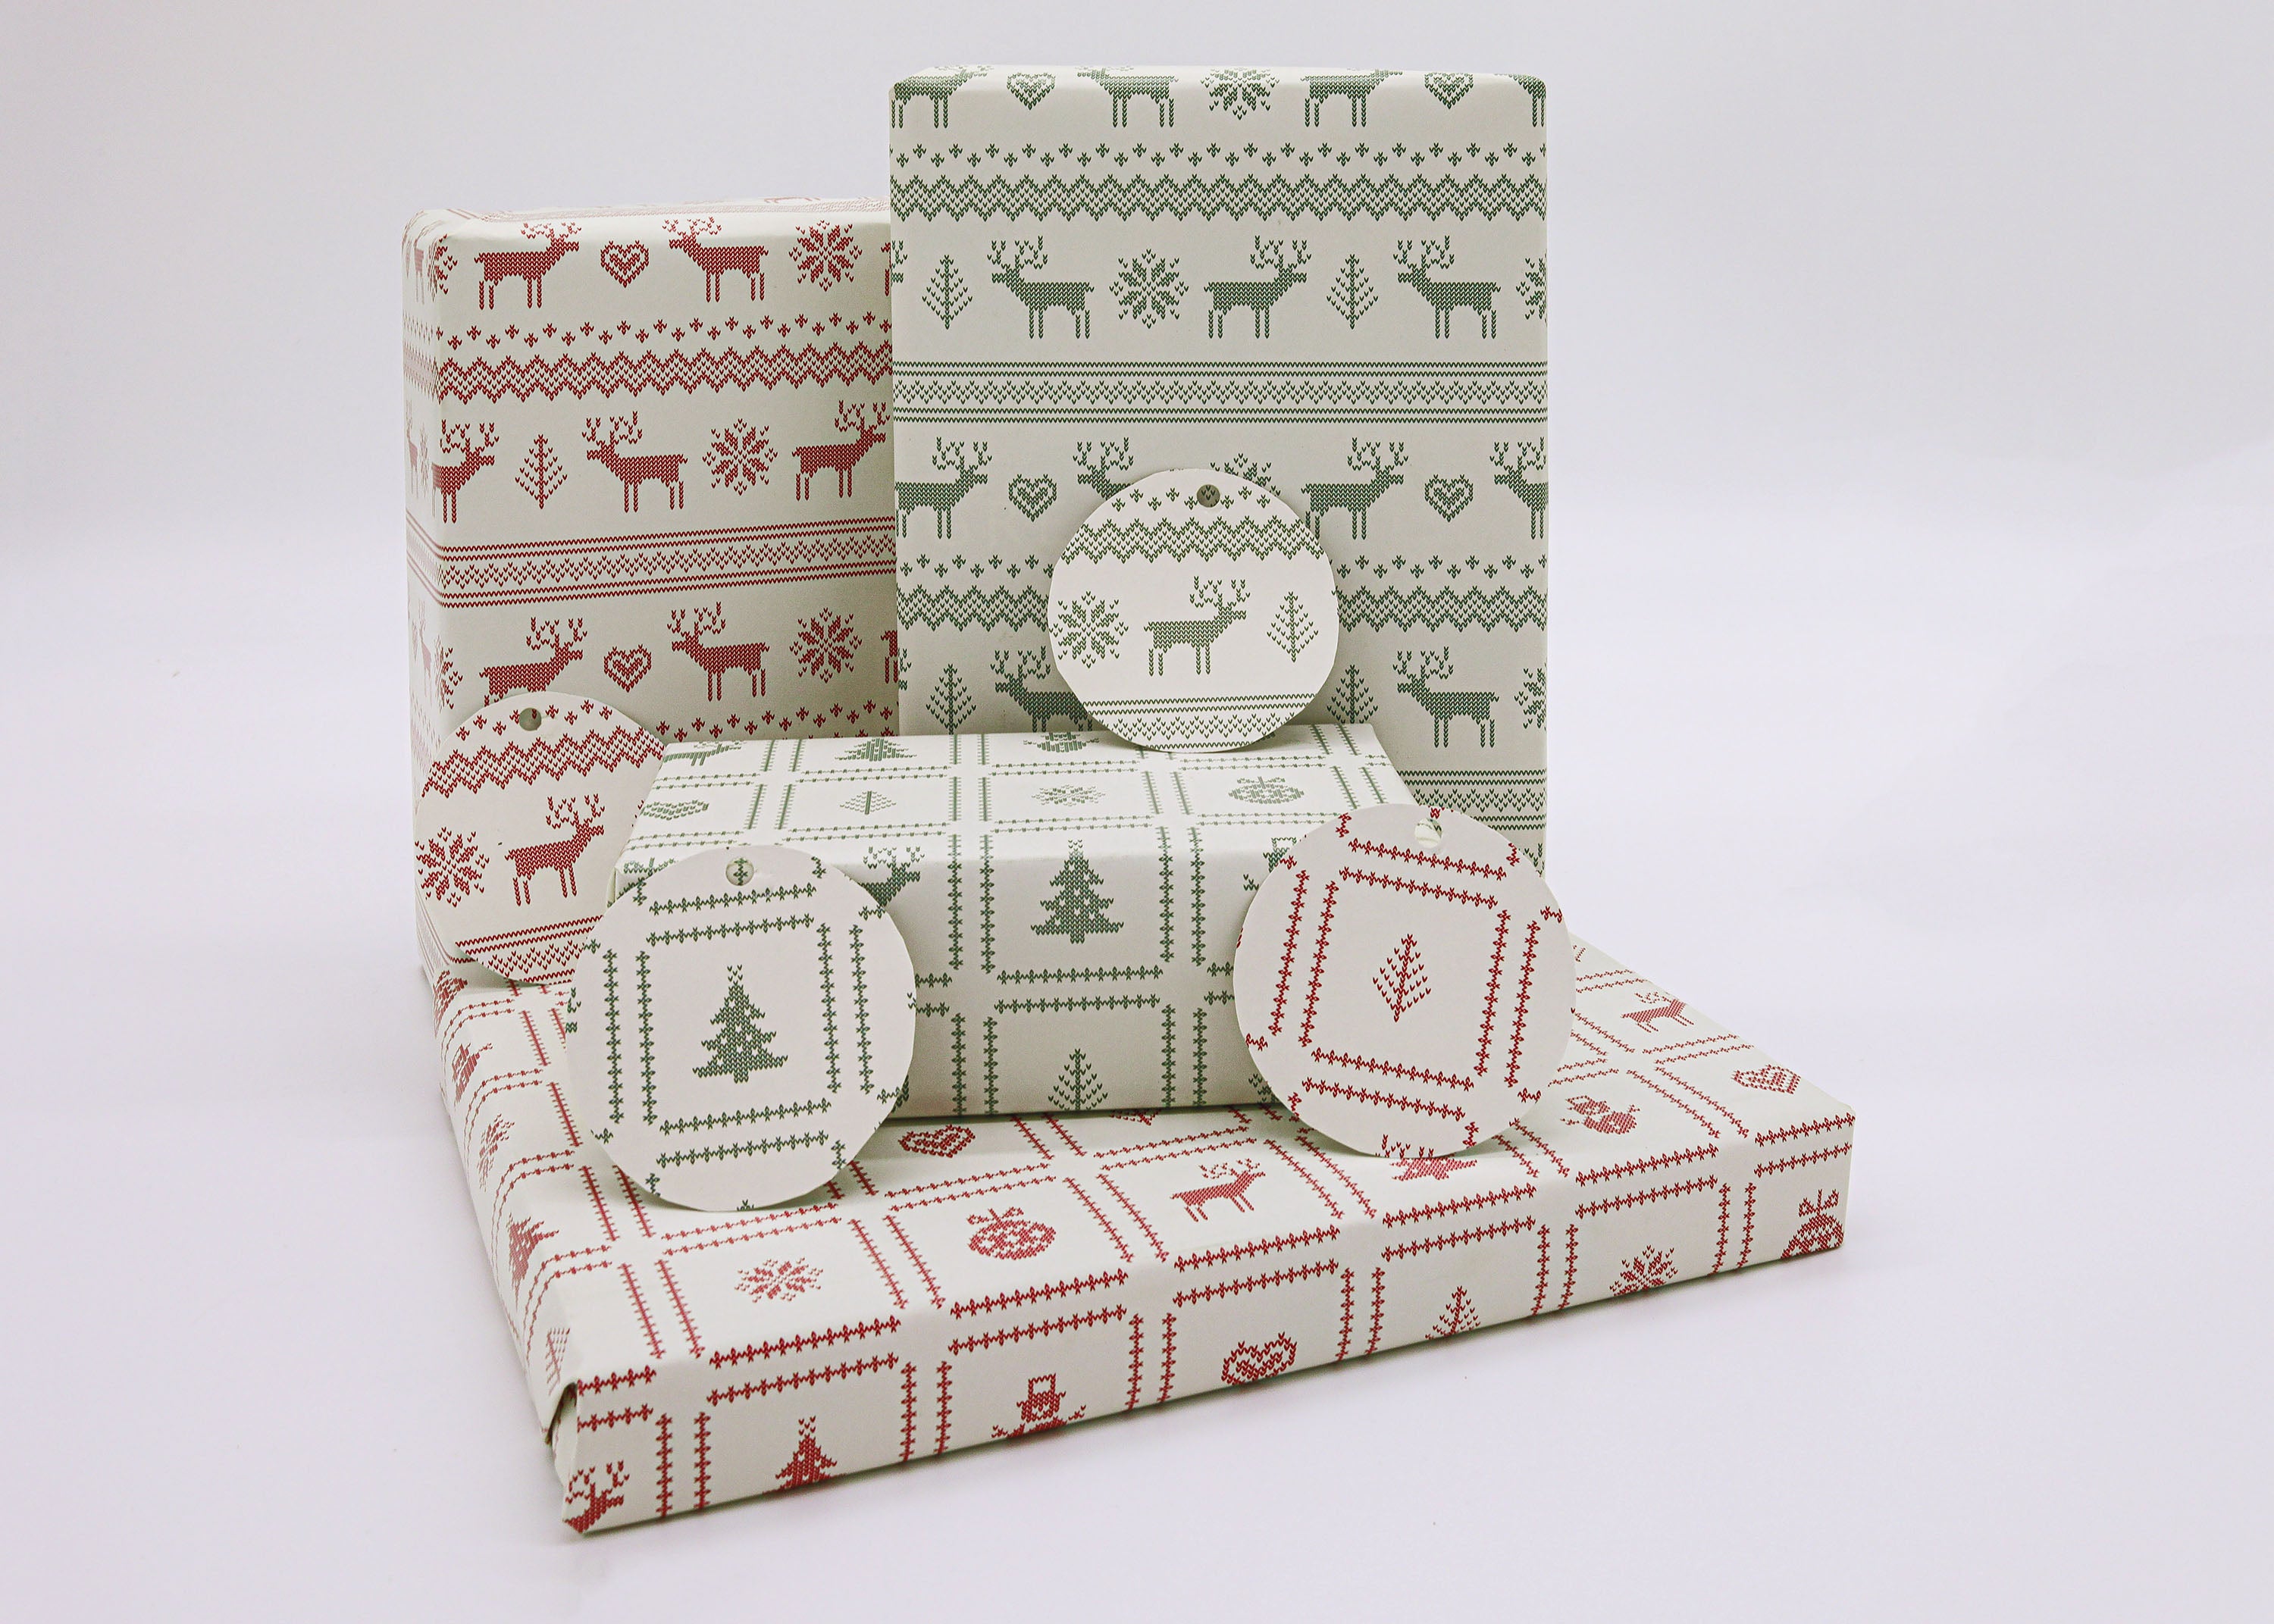 Modern Gray Neutral Scandinavian Homes Snowflakes Wrapping Paper Sheets |  Zazzle